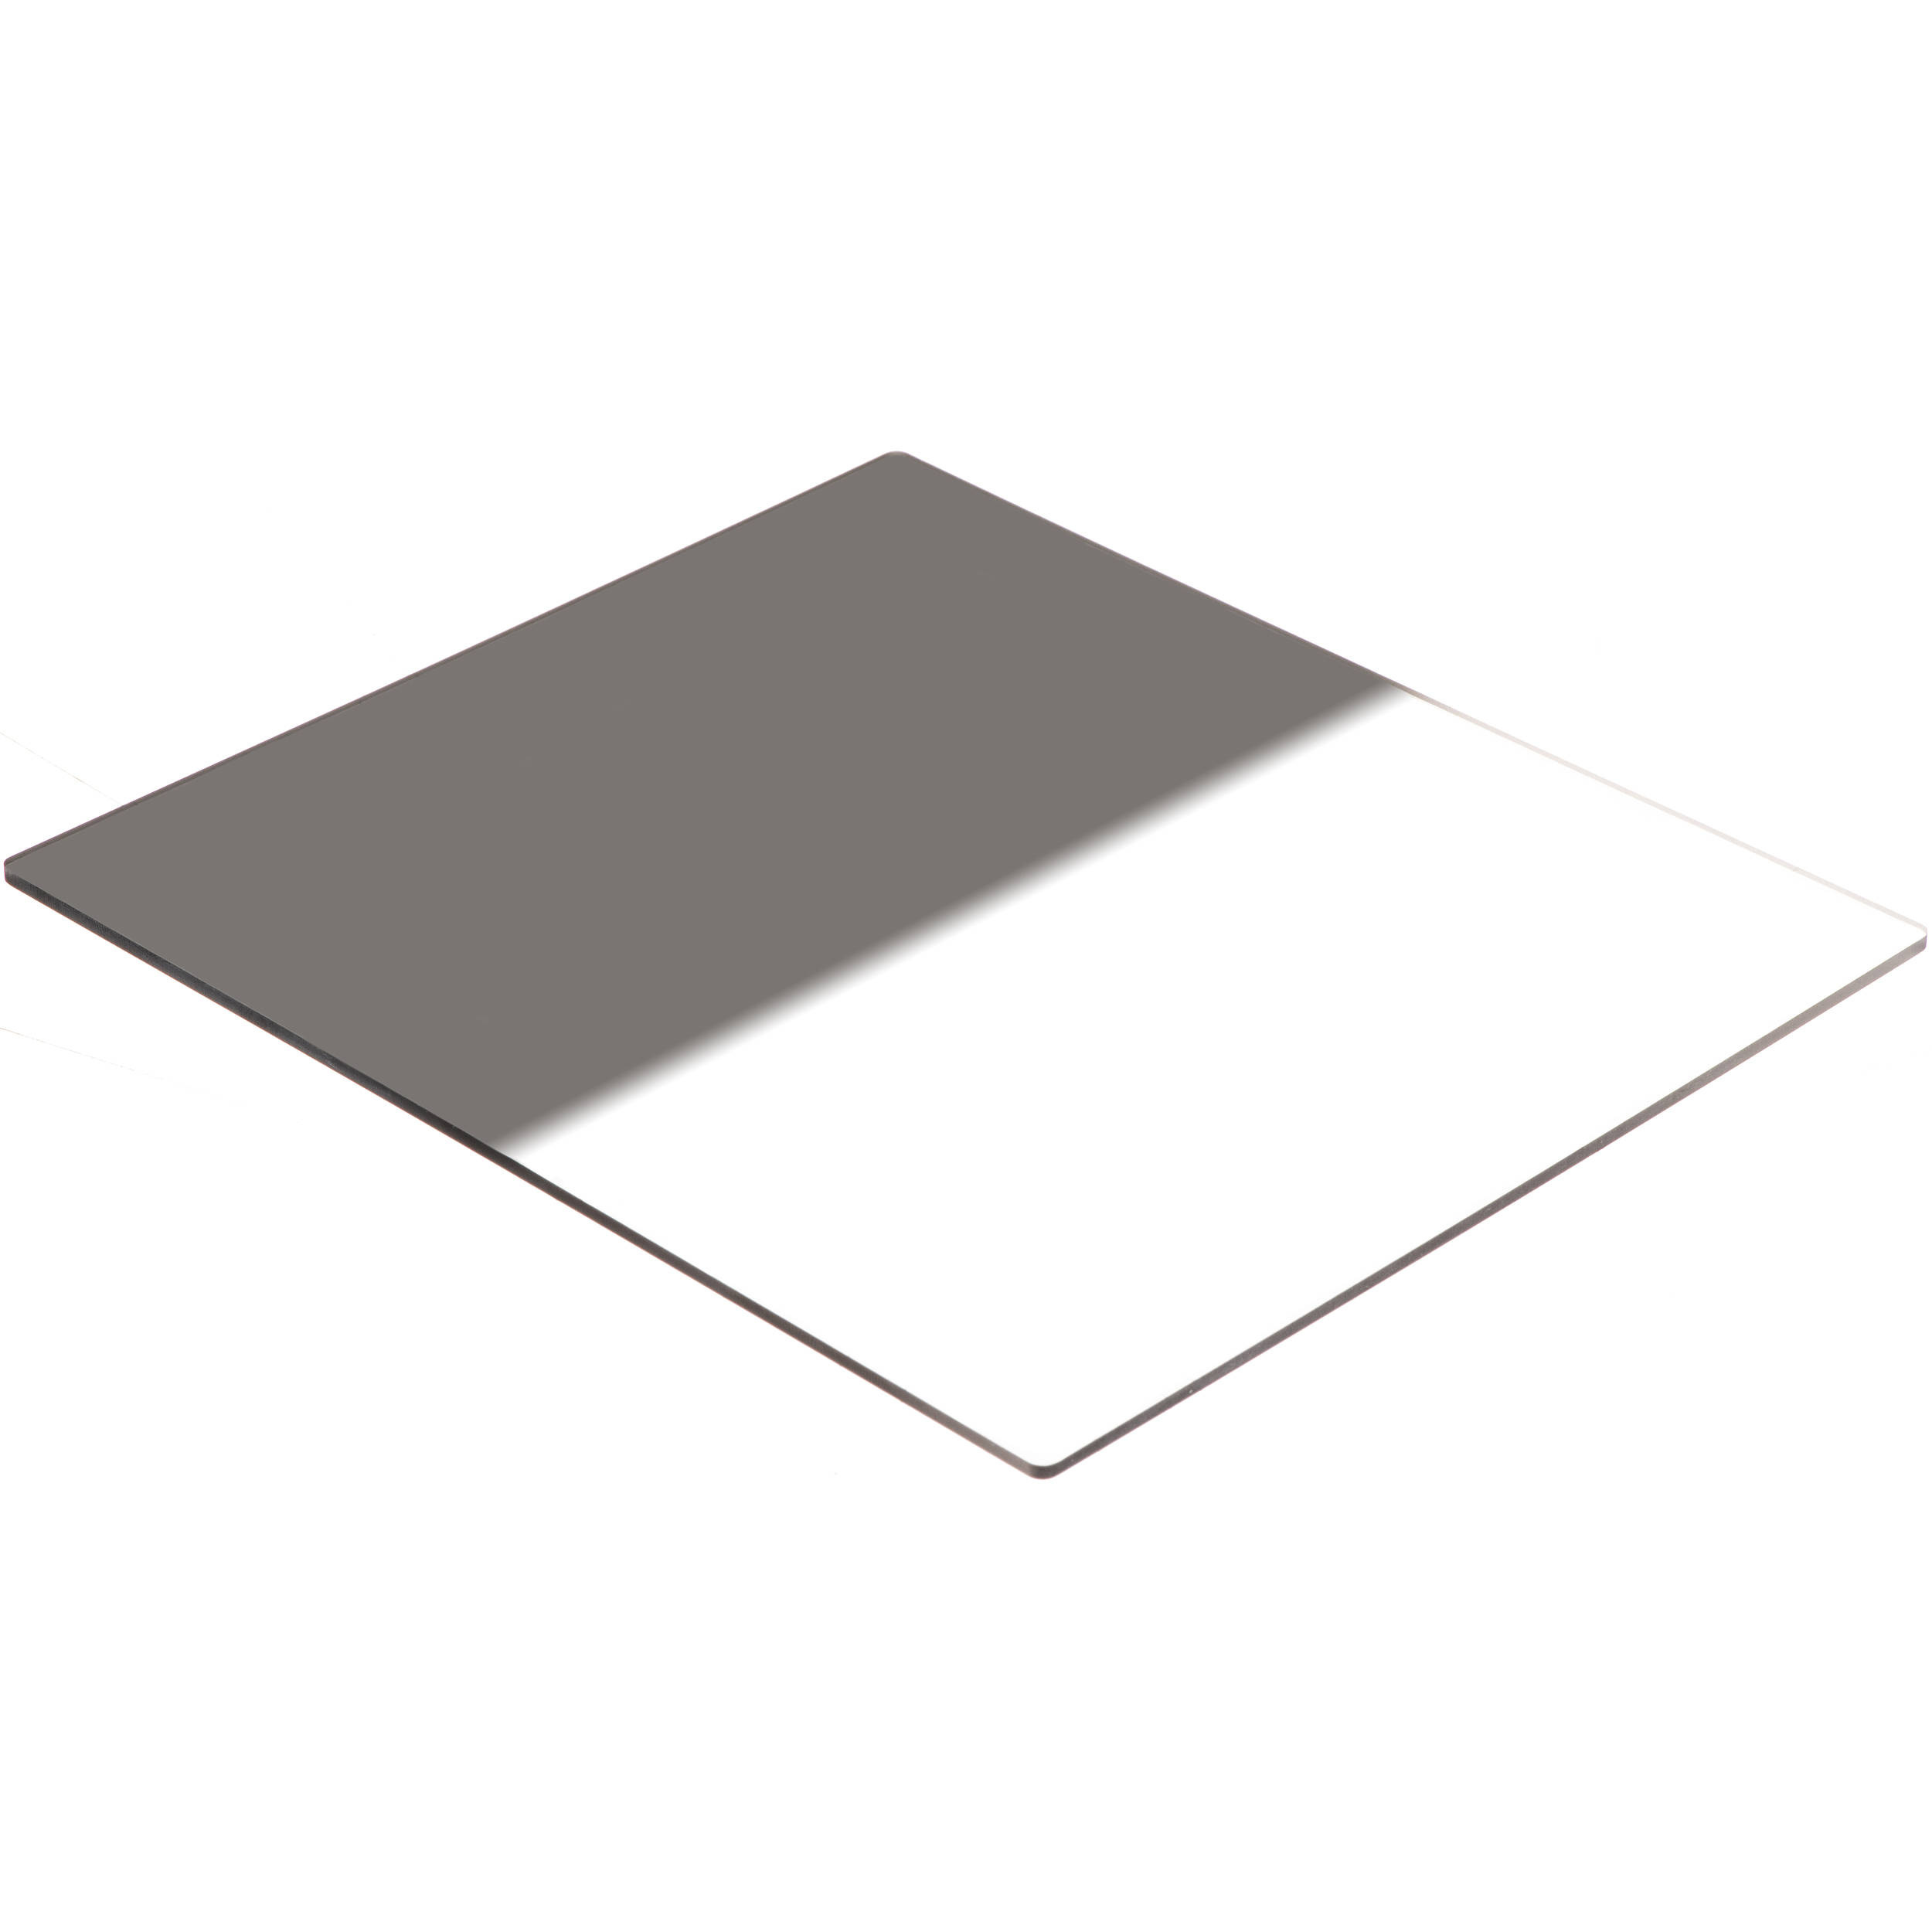 LEE Filters 150 x 170mm 0.9 Hard-Edge Graduated Neutral Density  Filter (3-Stop)